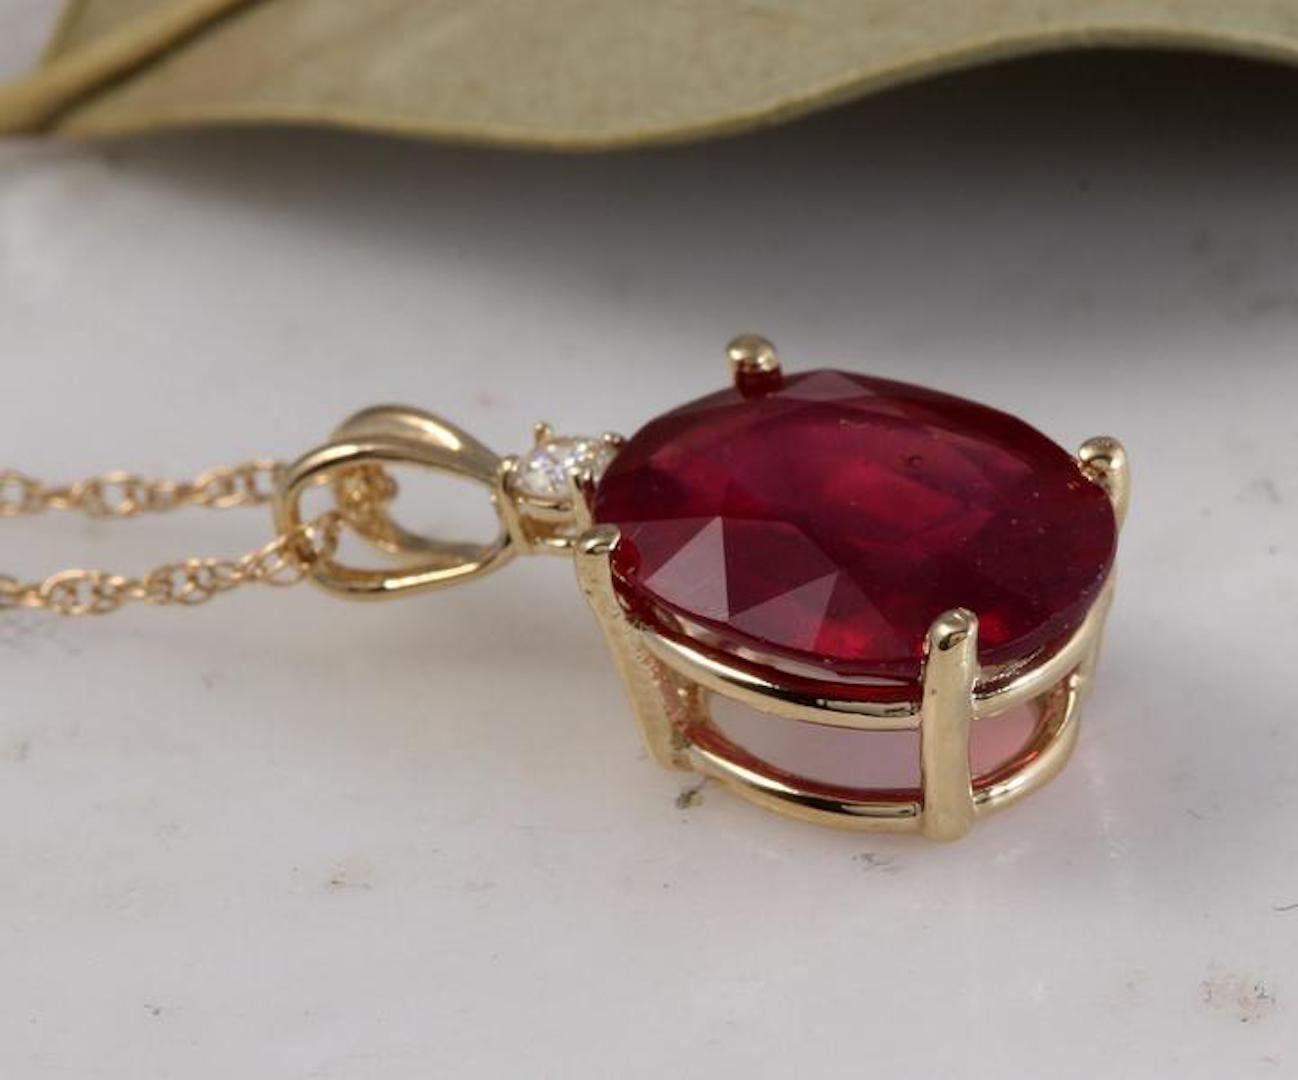 6.70Ct Natural Red Ruby and Diamond 14K Solid Yellow Gold Necklace

Amazing looking piece!

Stamped: 14K

Natural Oval Cut Ruby Weights: 6.70 Carats

Ruby Measures: 12 x 10mm

Total Natural Round Diamond weights: 0.05 Carats (H / SI2)

Total Chain